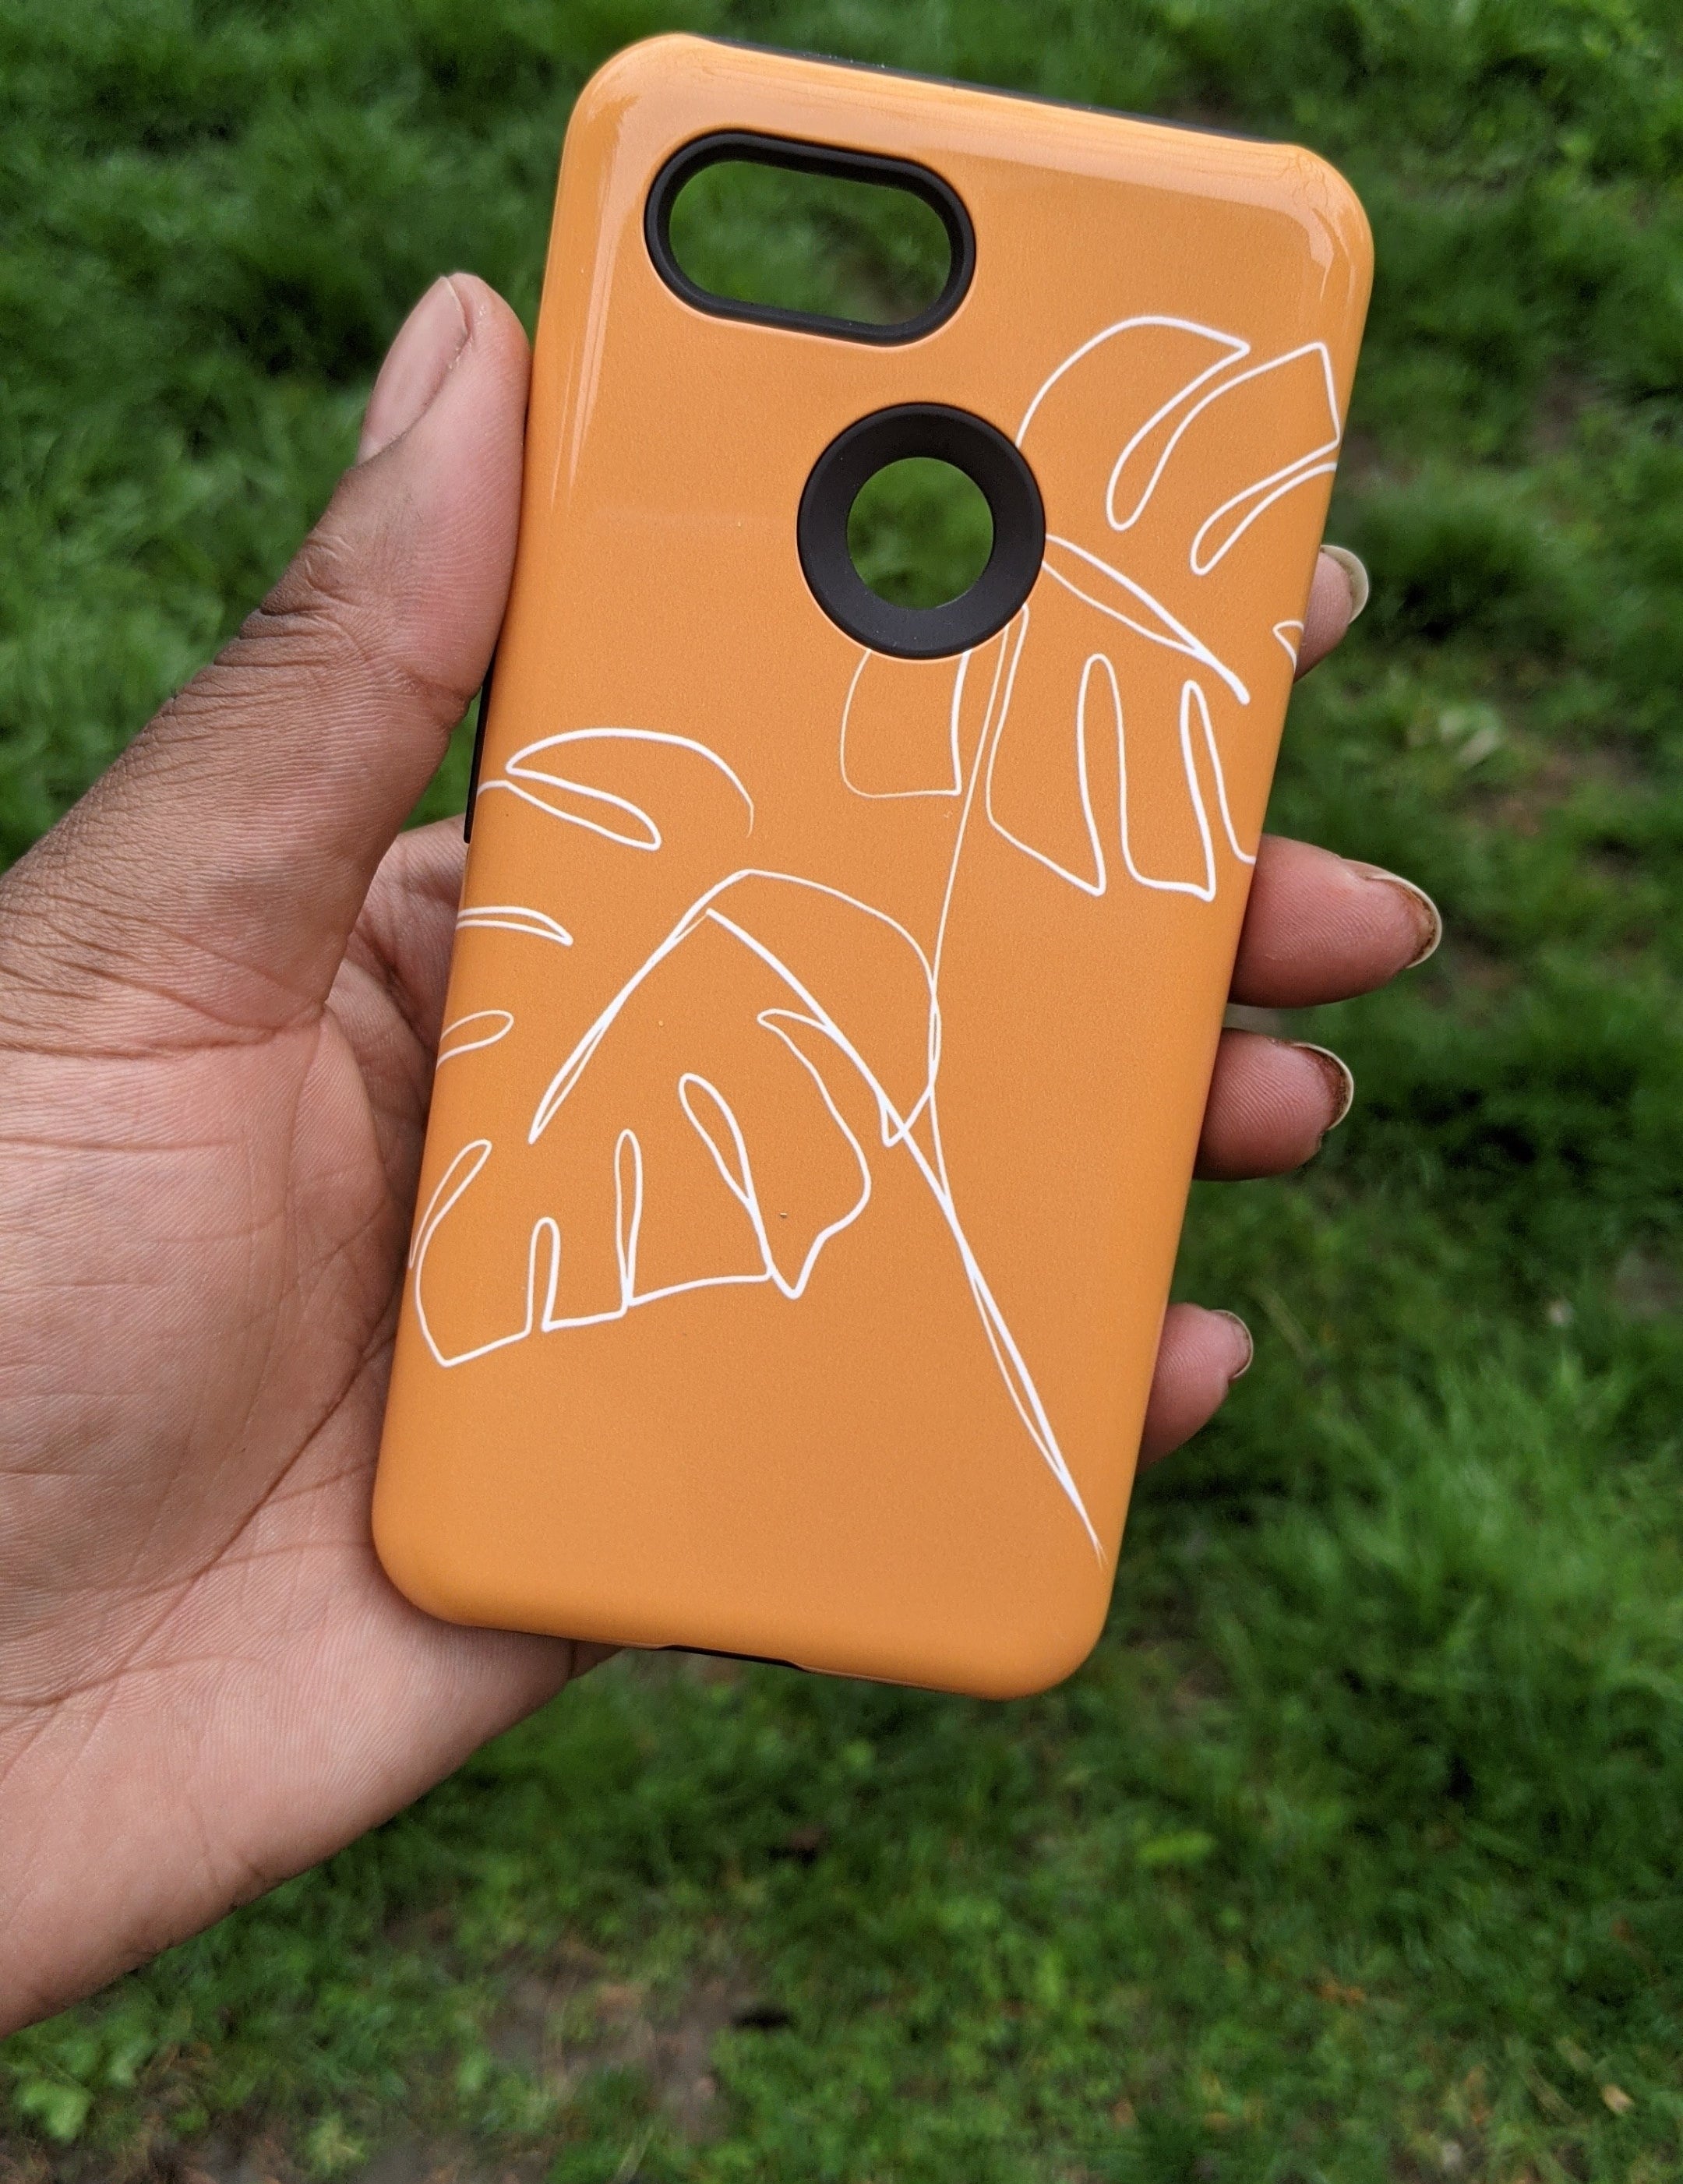 A person holding a phone case